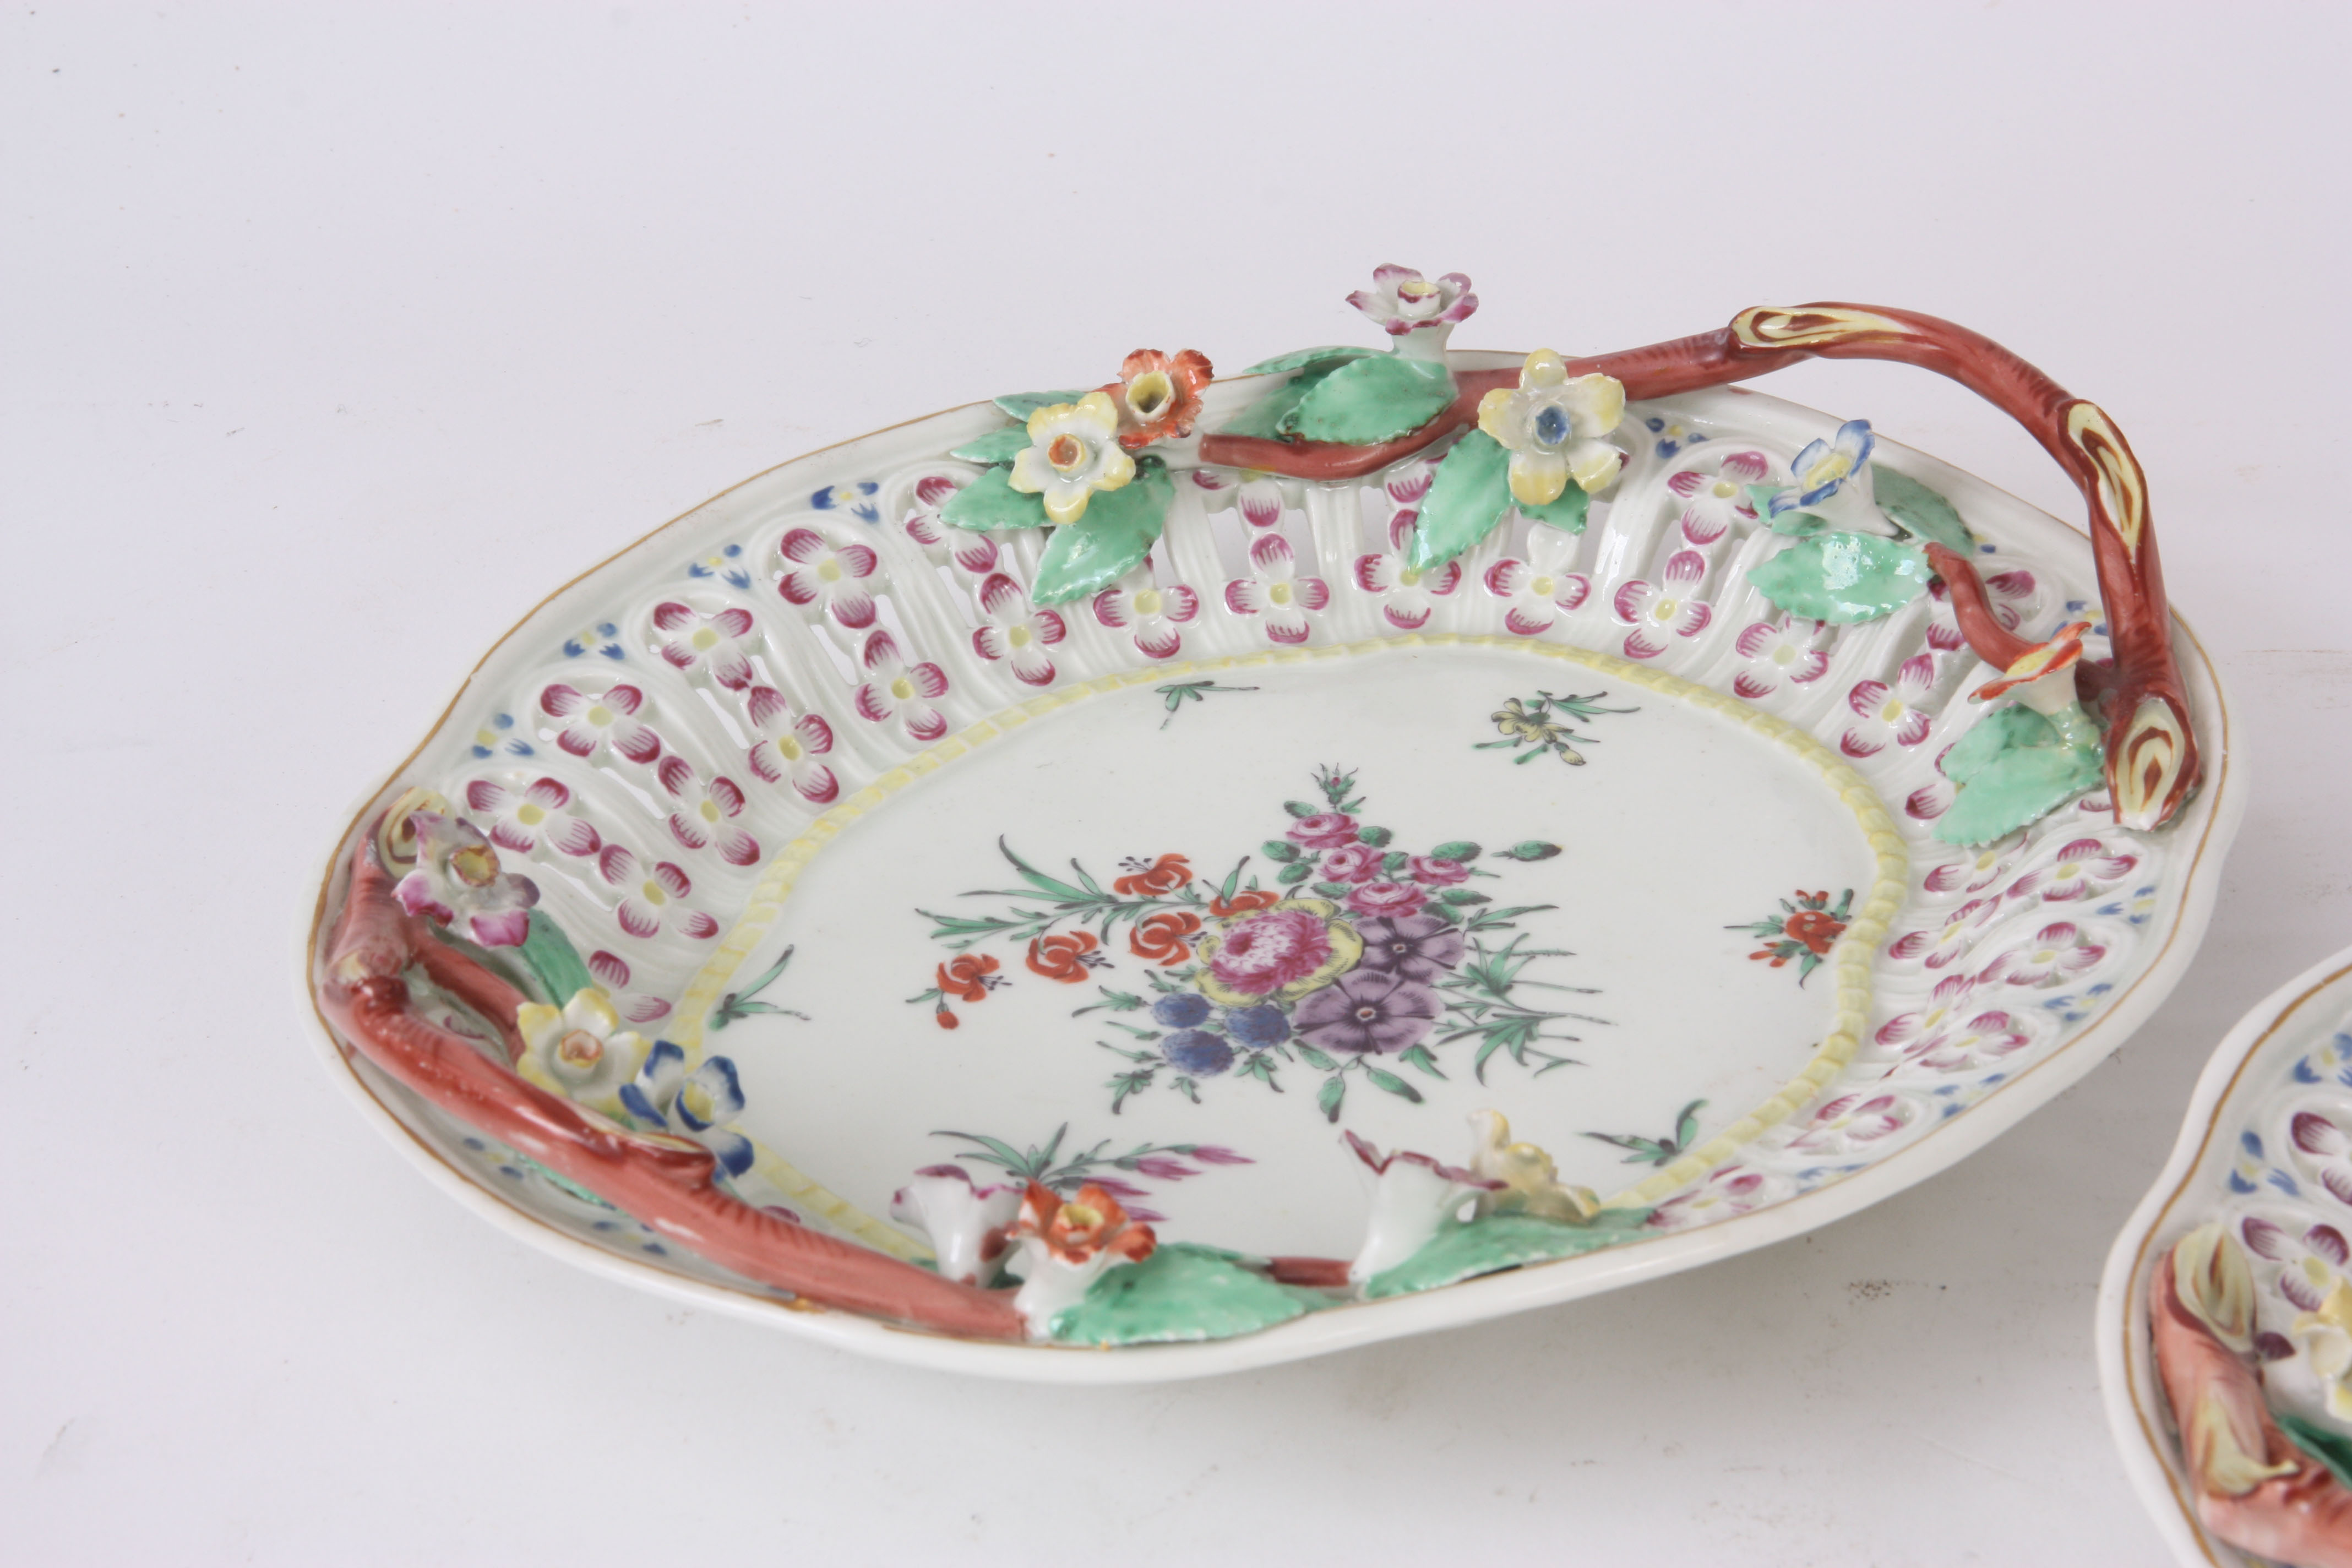 A PAIR OF LATE 18TH CENTURY FIRST PERIOD WORCESTER FACTORY PORCELAIN PIERCED DISHES - Image 3 of 7